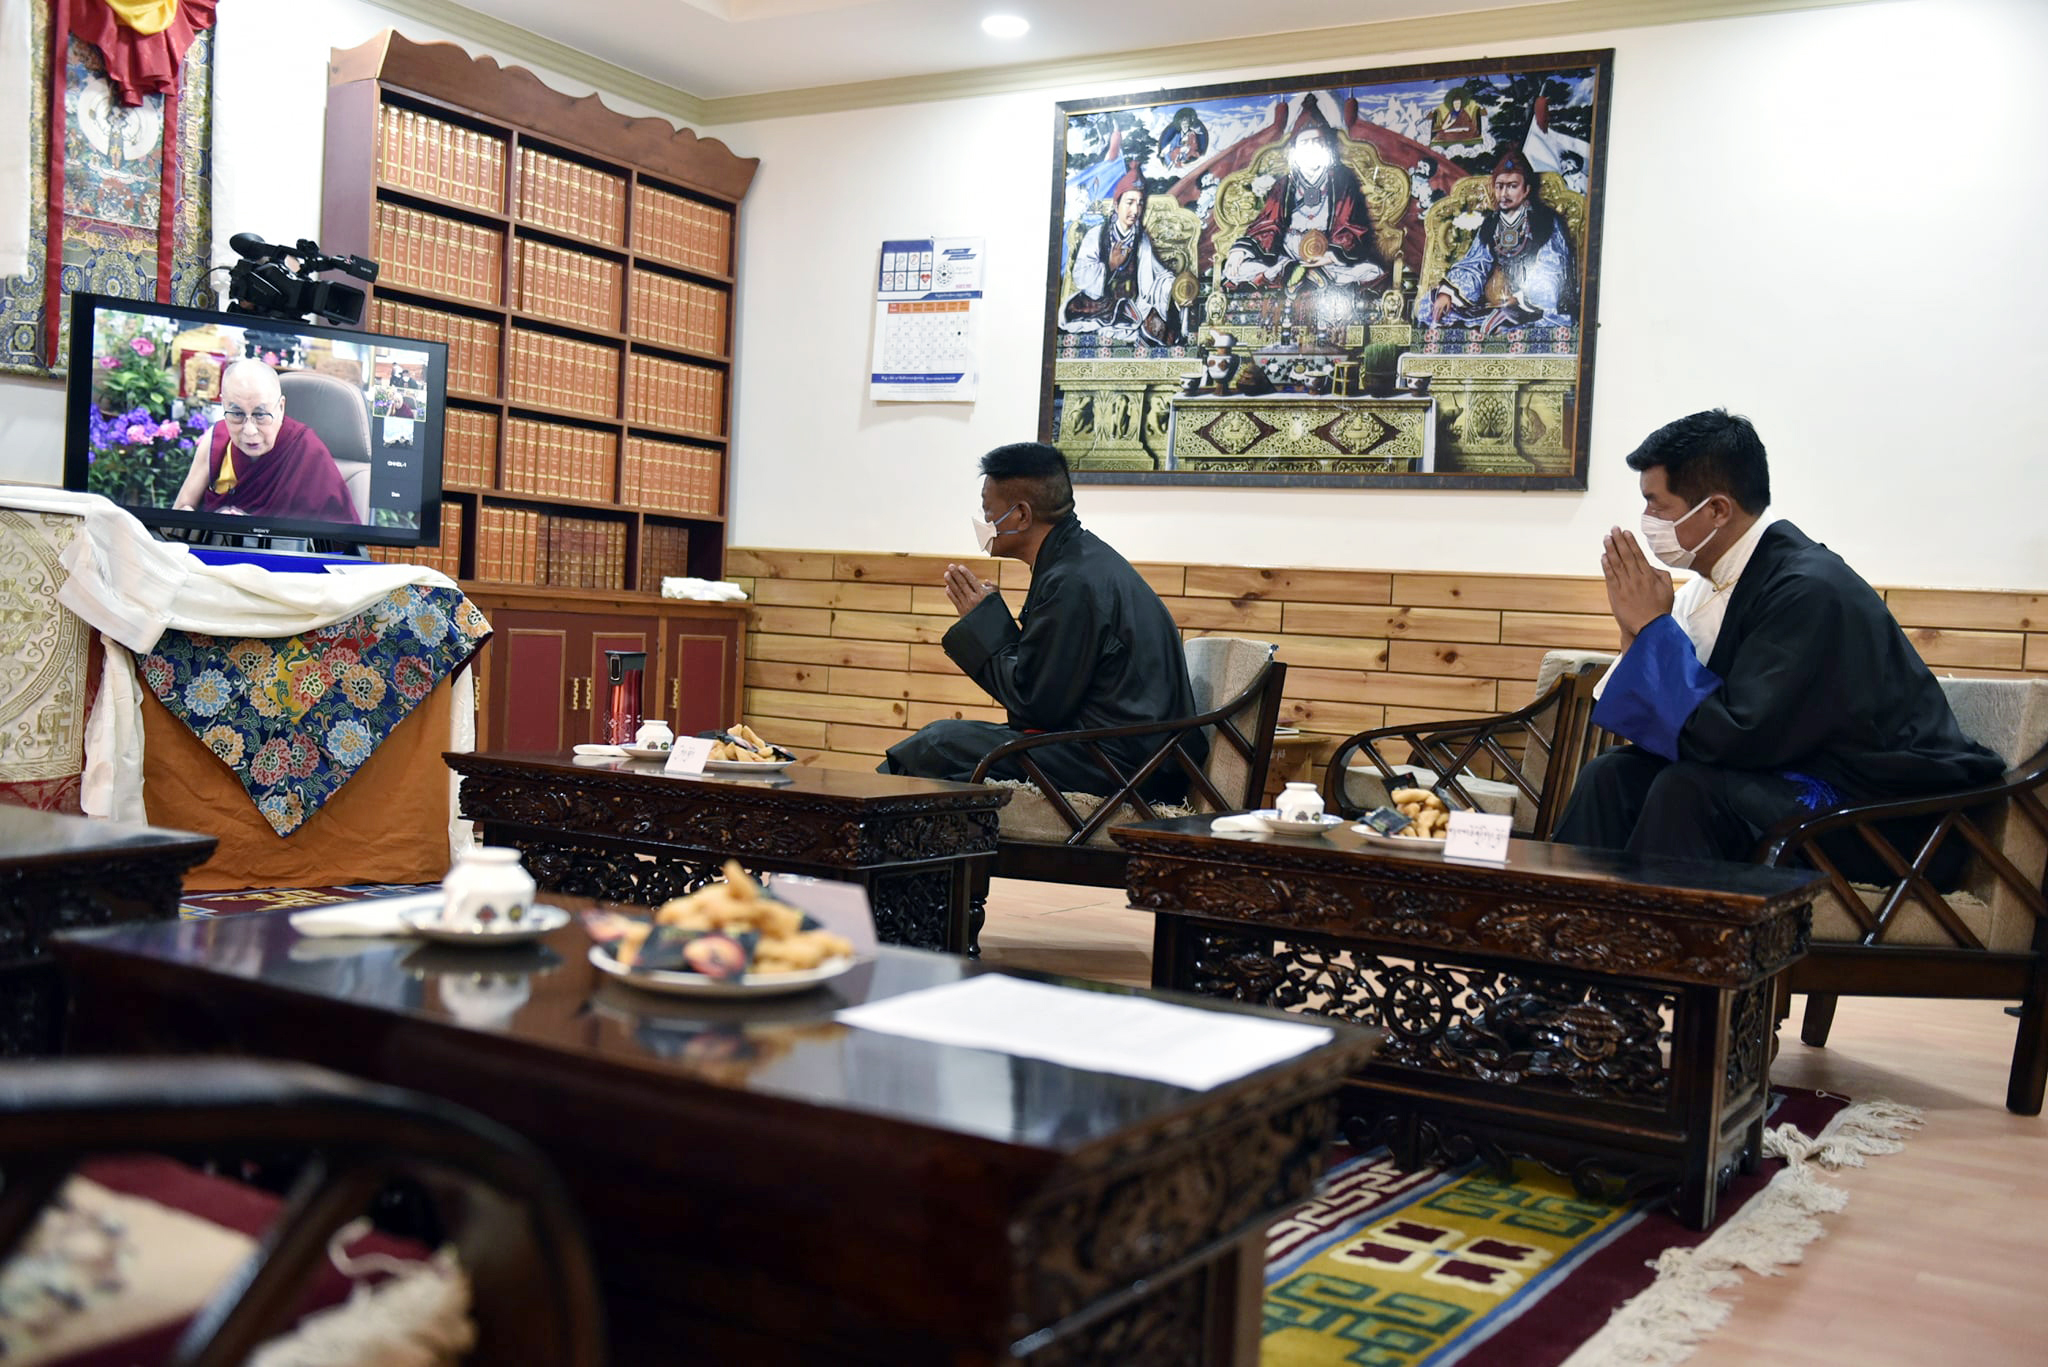 Tibetans elect a new leader who faces challenge of an ageing Dalai Lama and a rising China